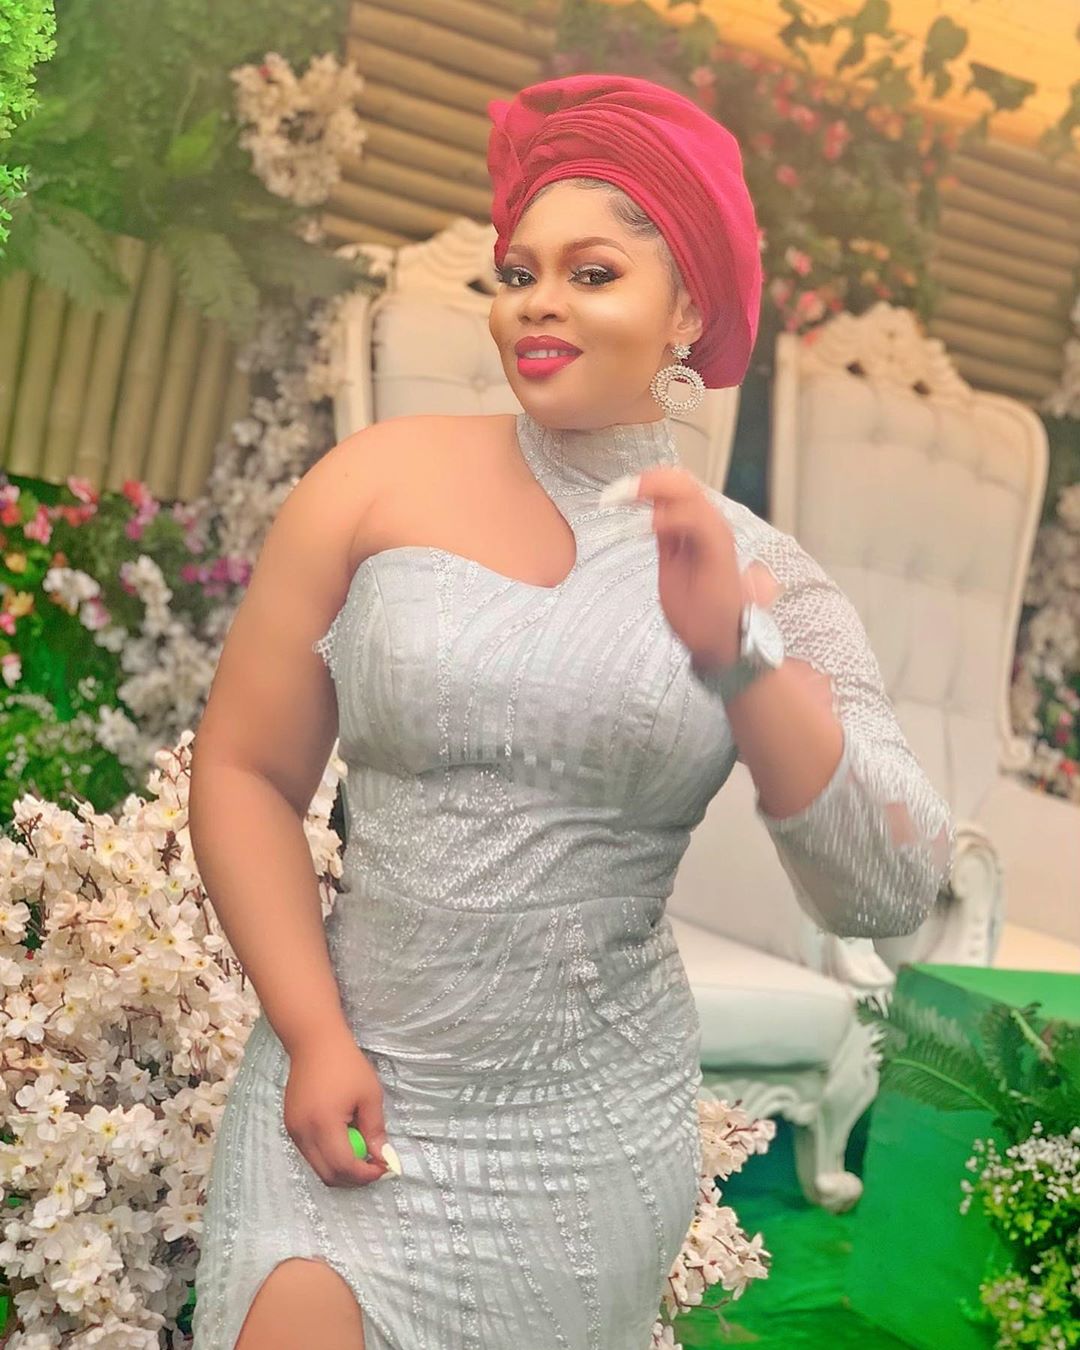 Chinwe Eze: Gina Kings Biography, Age, Husband, Net Worth, Instagram,  Married, Family, Nollywood Actress